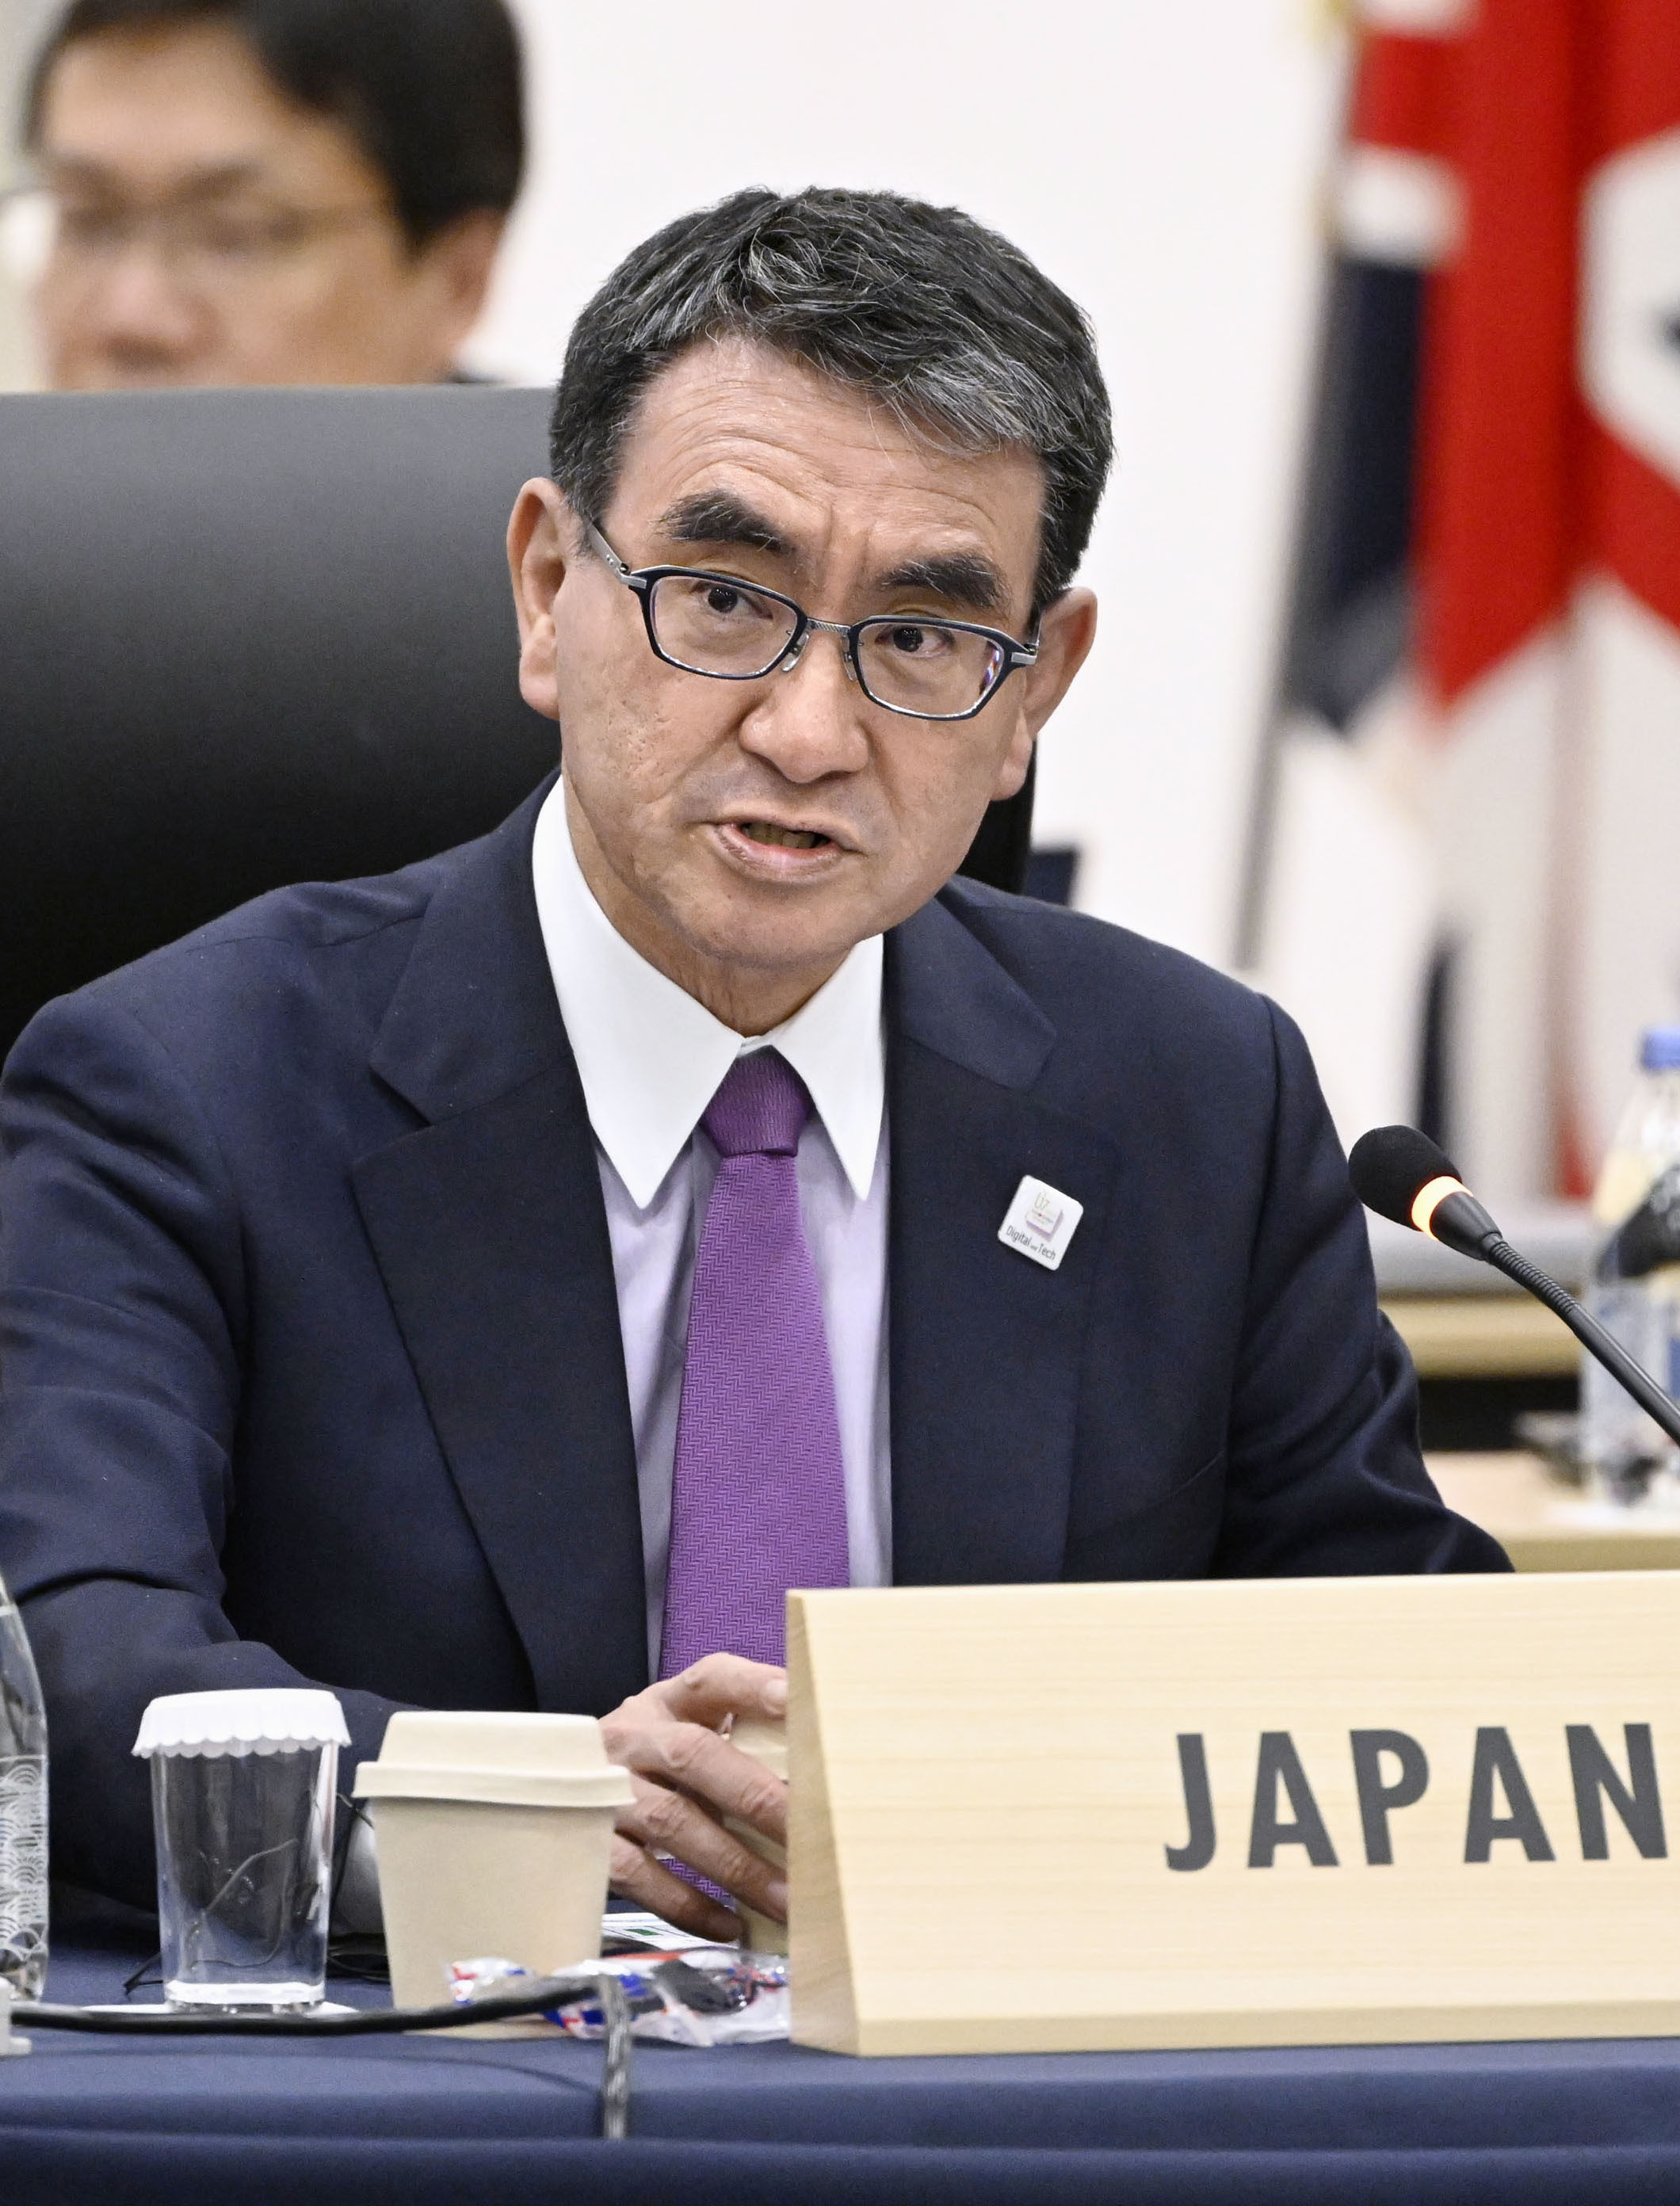 Taro Kono, Japan’s digital reform minister, speaks during a meeting of Group of Seven ministers last month. Photo: Kyodo